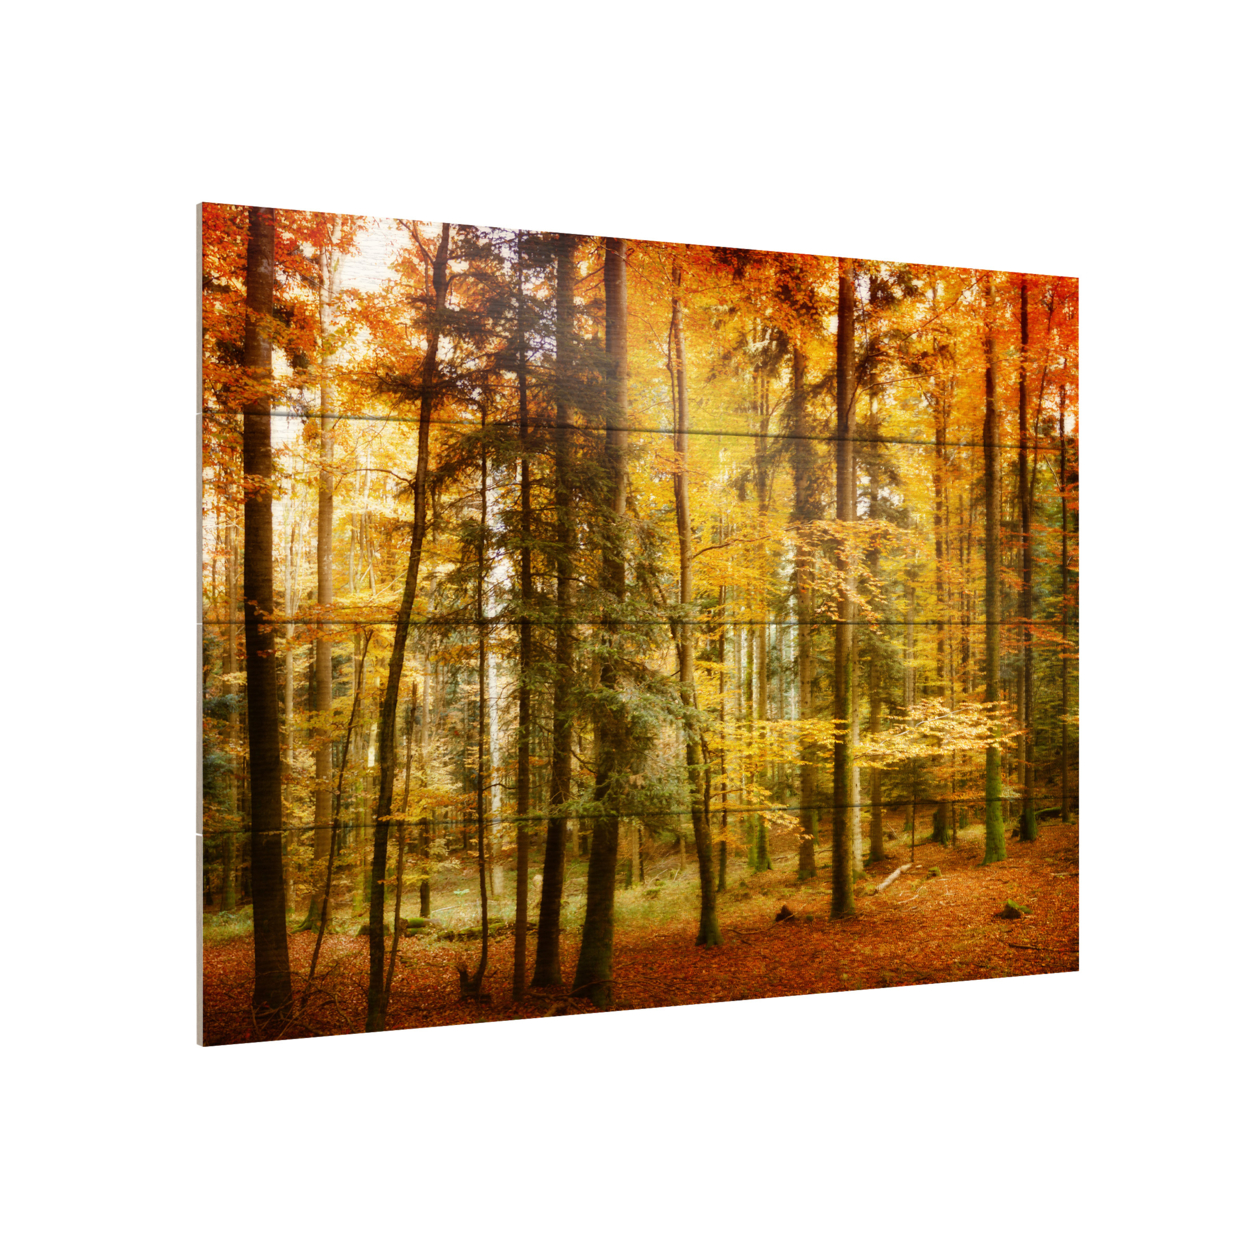 Wall Art 12 X 16 Inches Titled Brilliant Fall Color Ready To Hang Printed On Wooden Planks